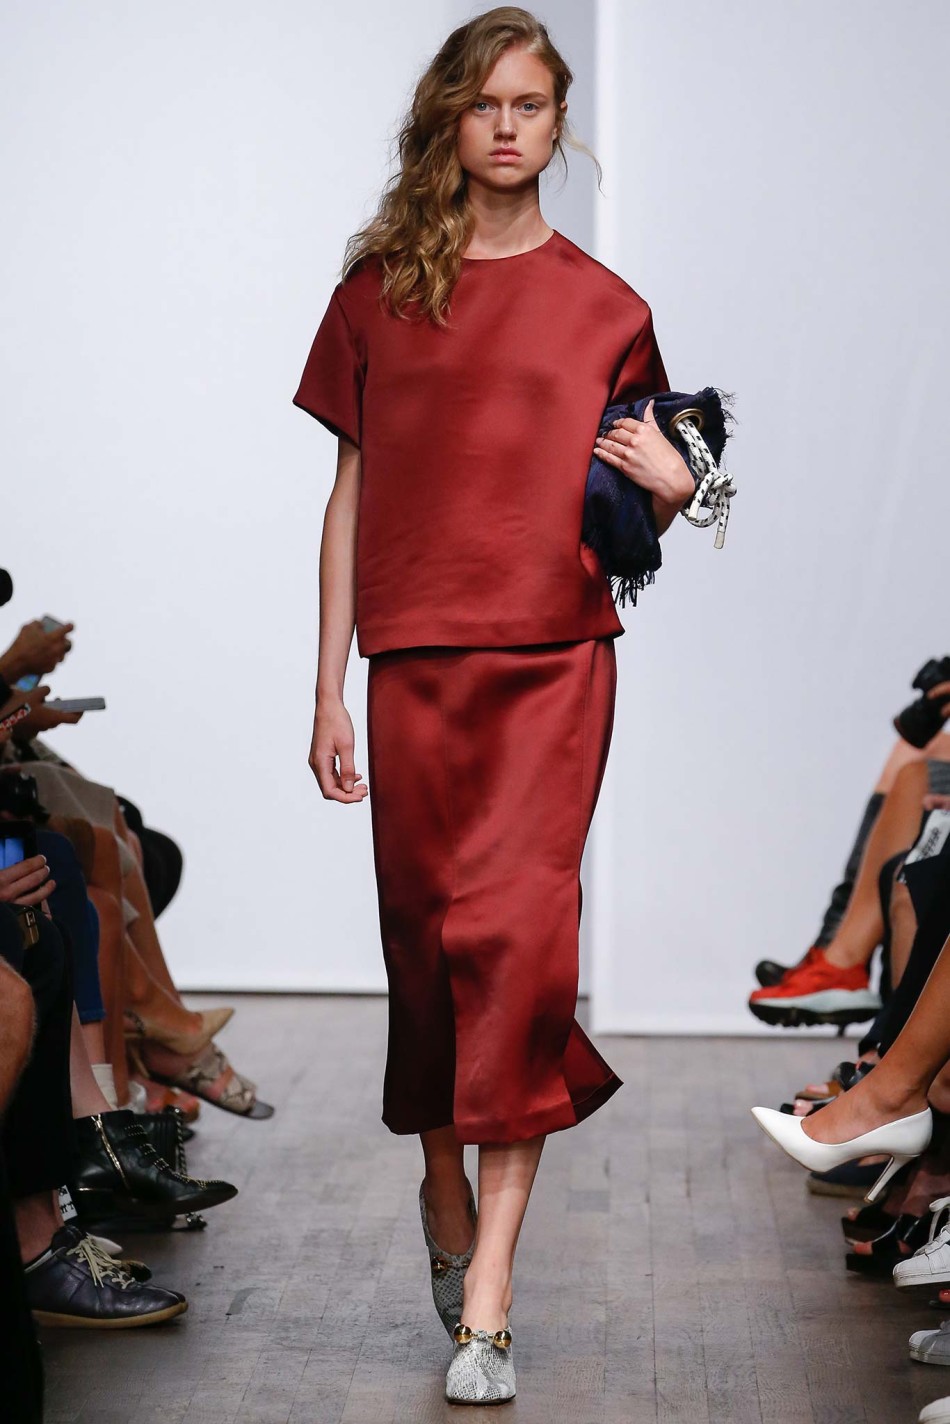 Keylooks from the runway at Carin Wester | Envelope